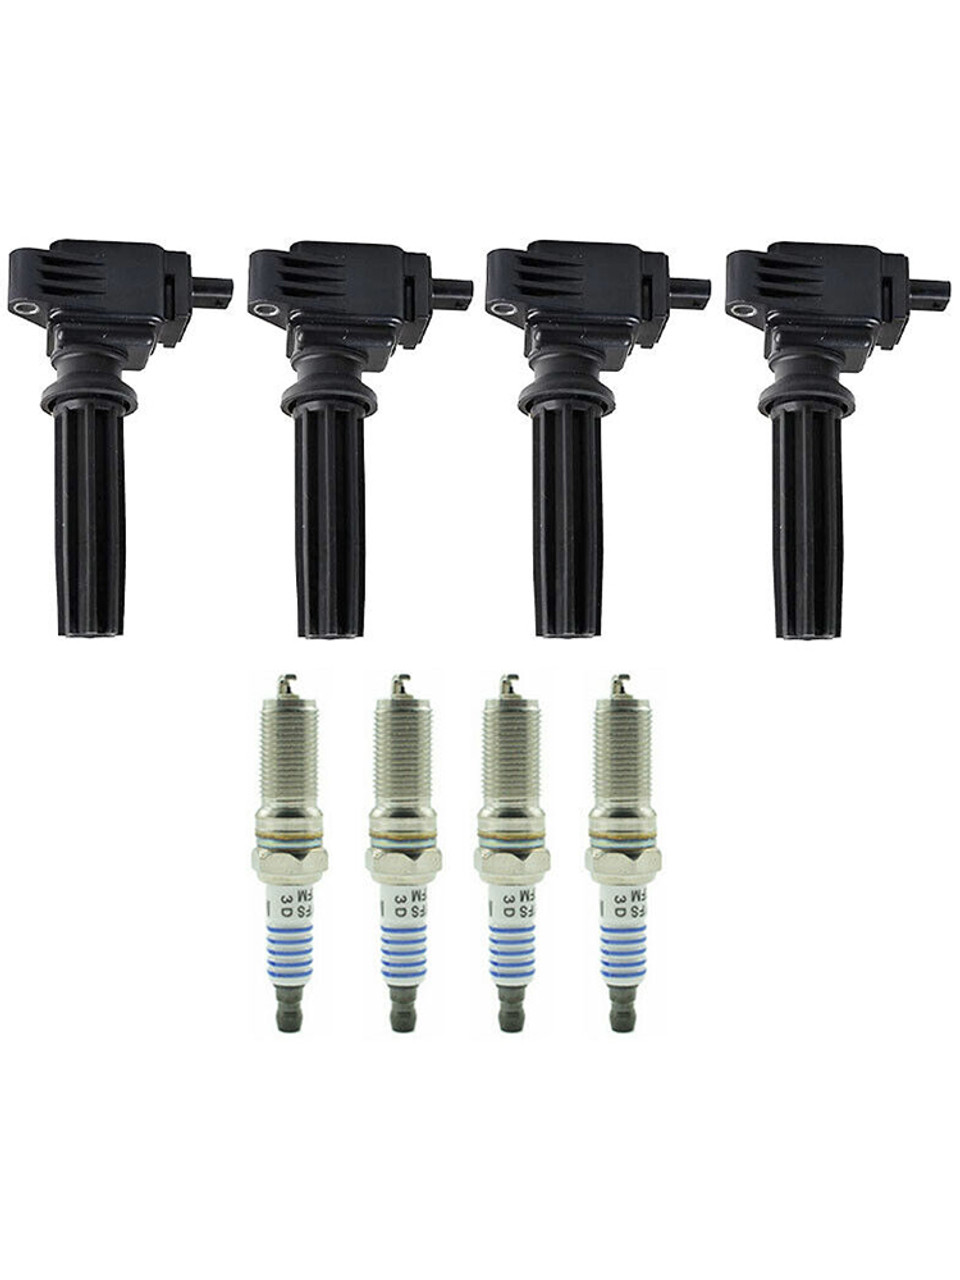 4X Ignition Coils+Spark Plugs UF670 For Ford Fusion Focus Taurus 2.0L 2013-2017